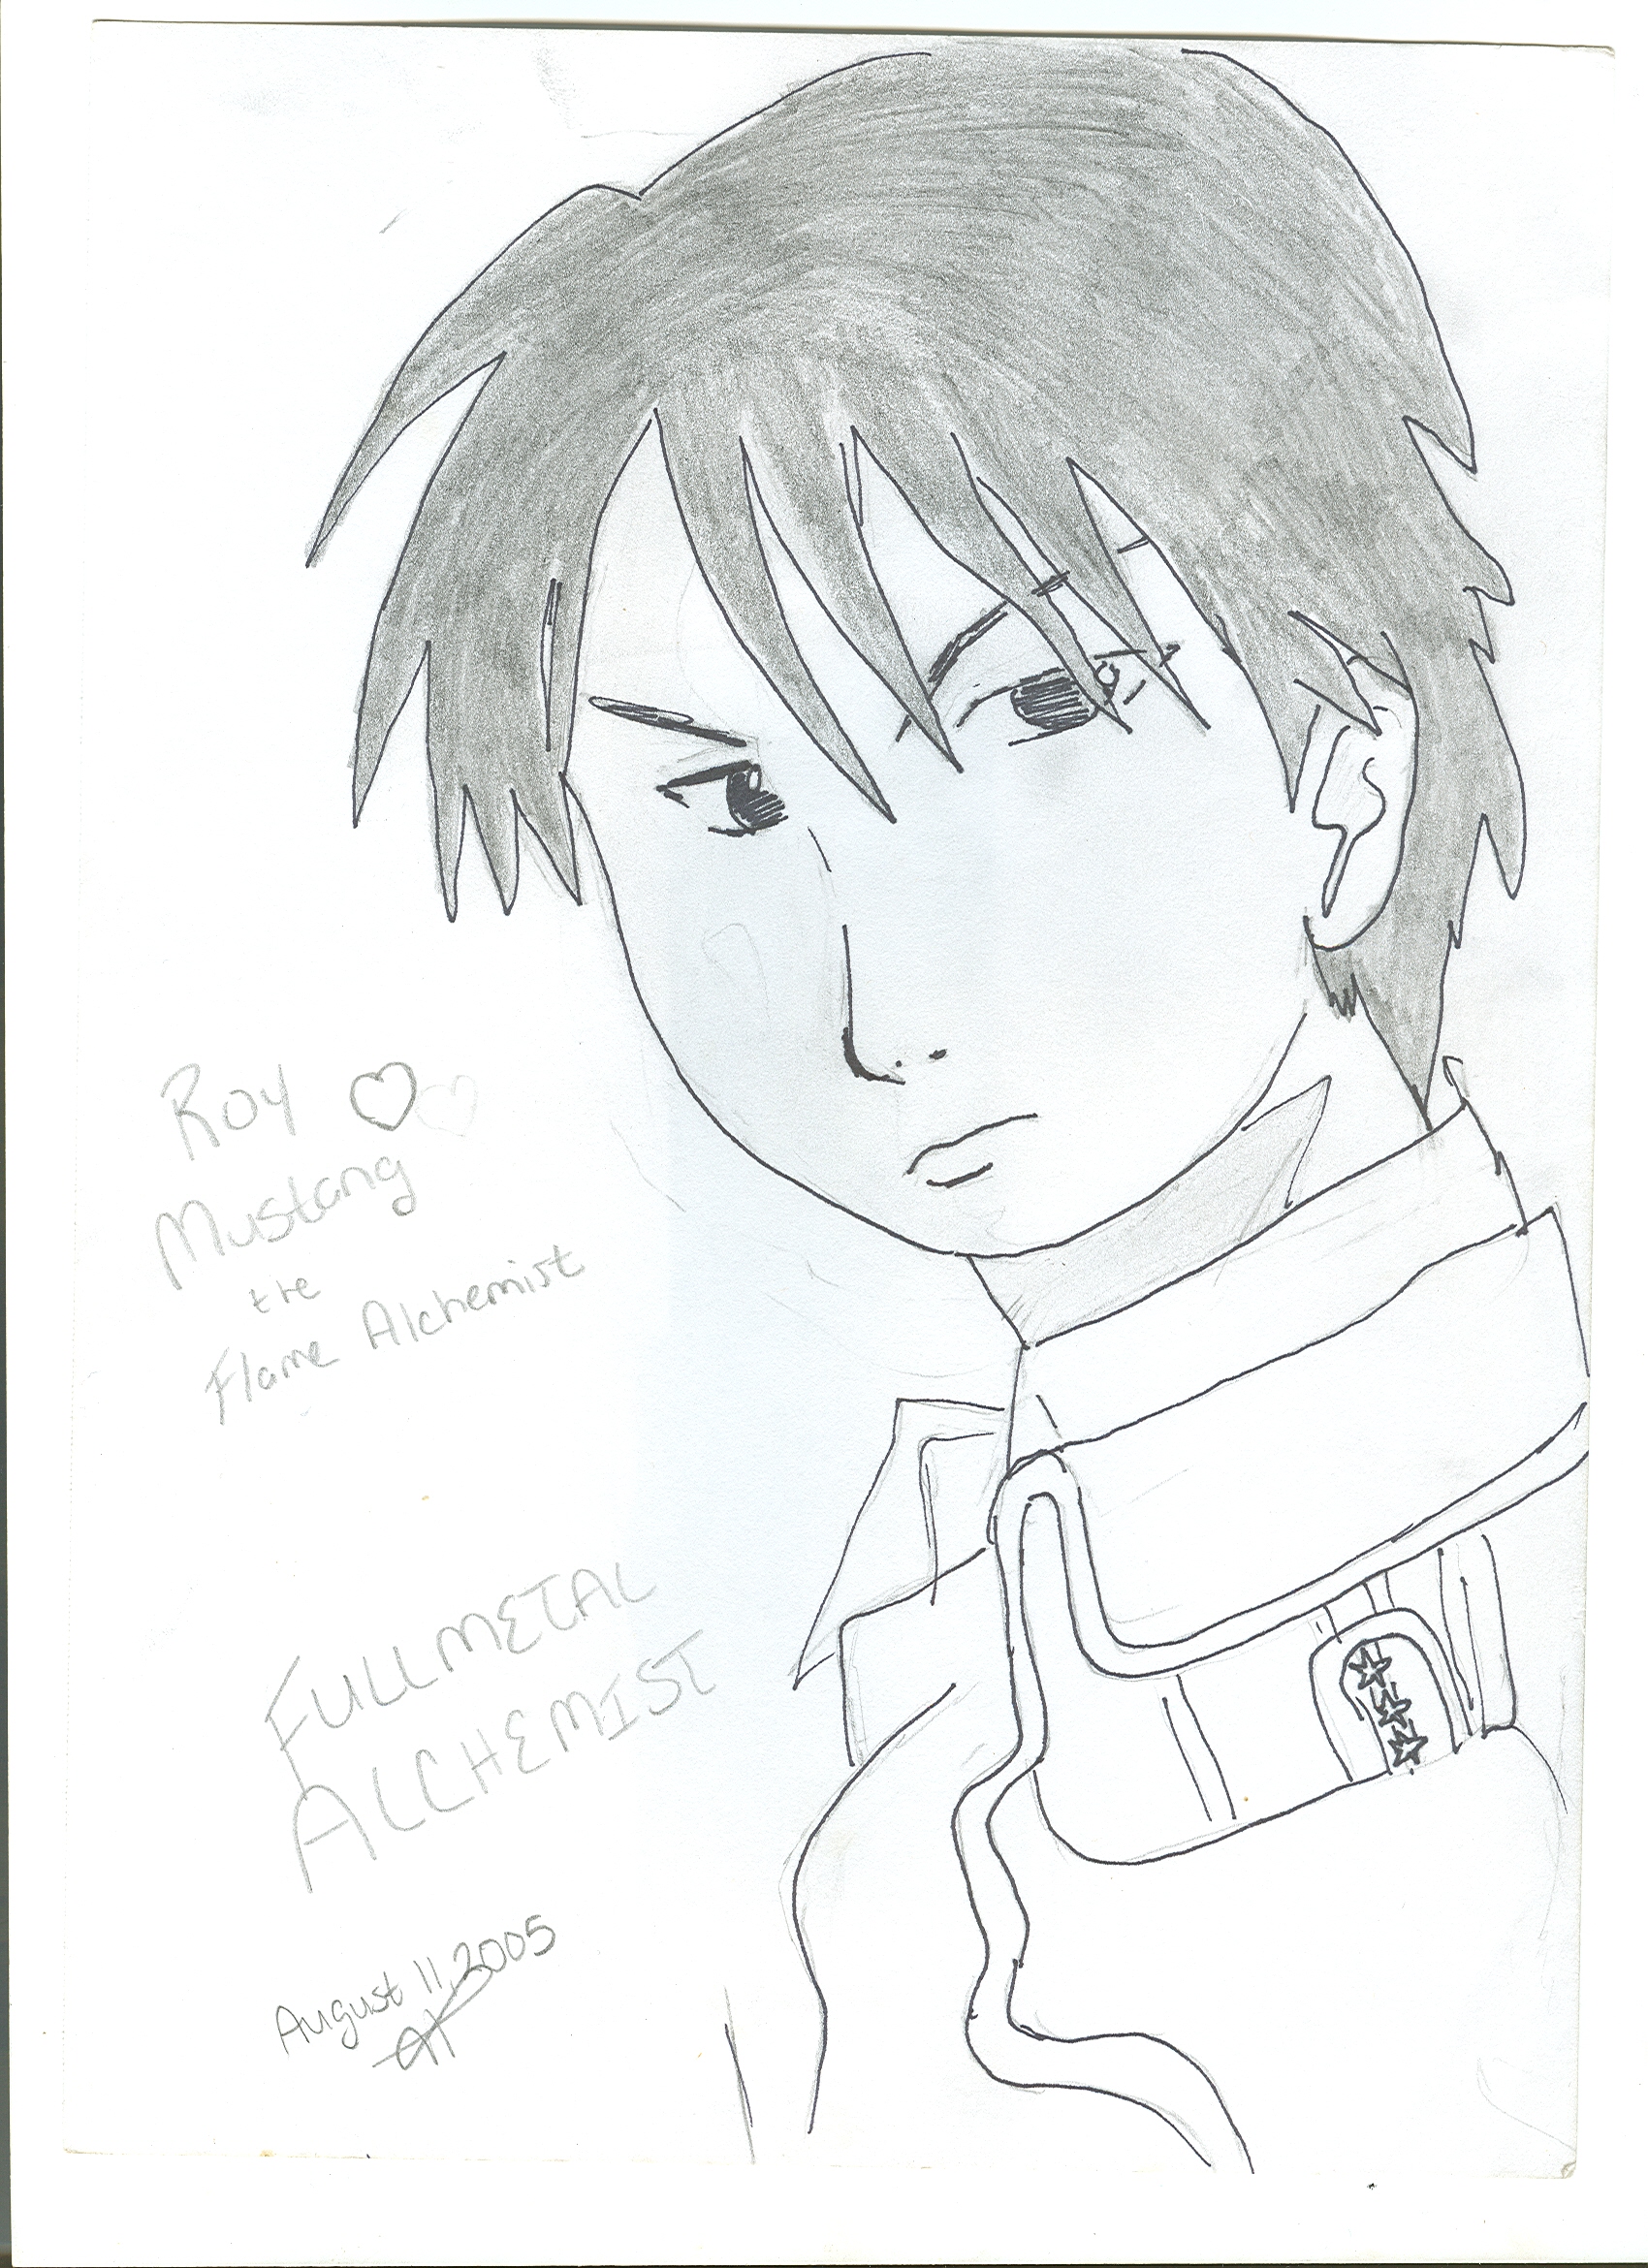 Roy Mustang by Physco_Squirrel